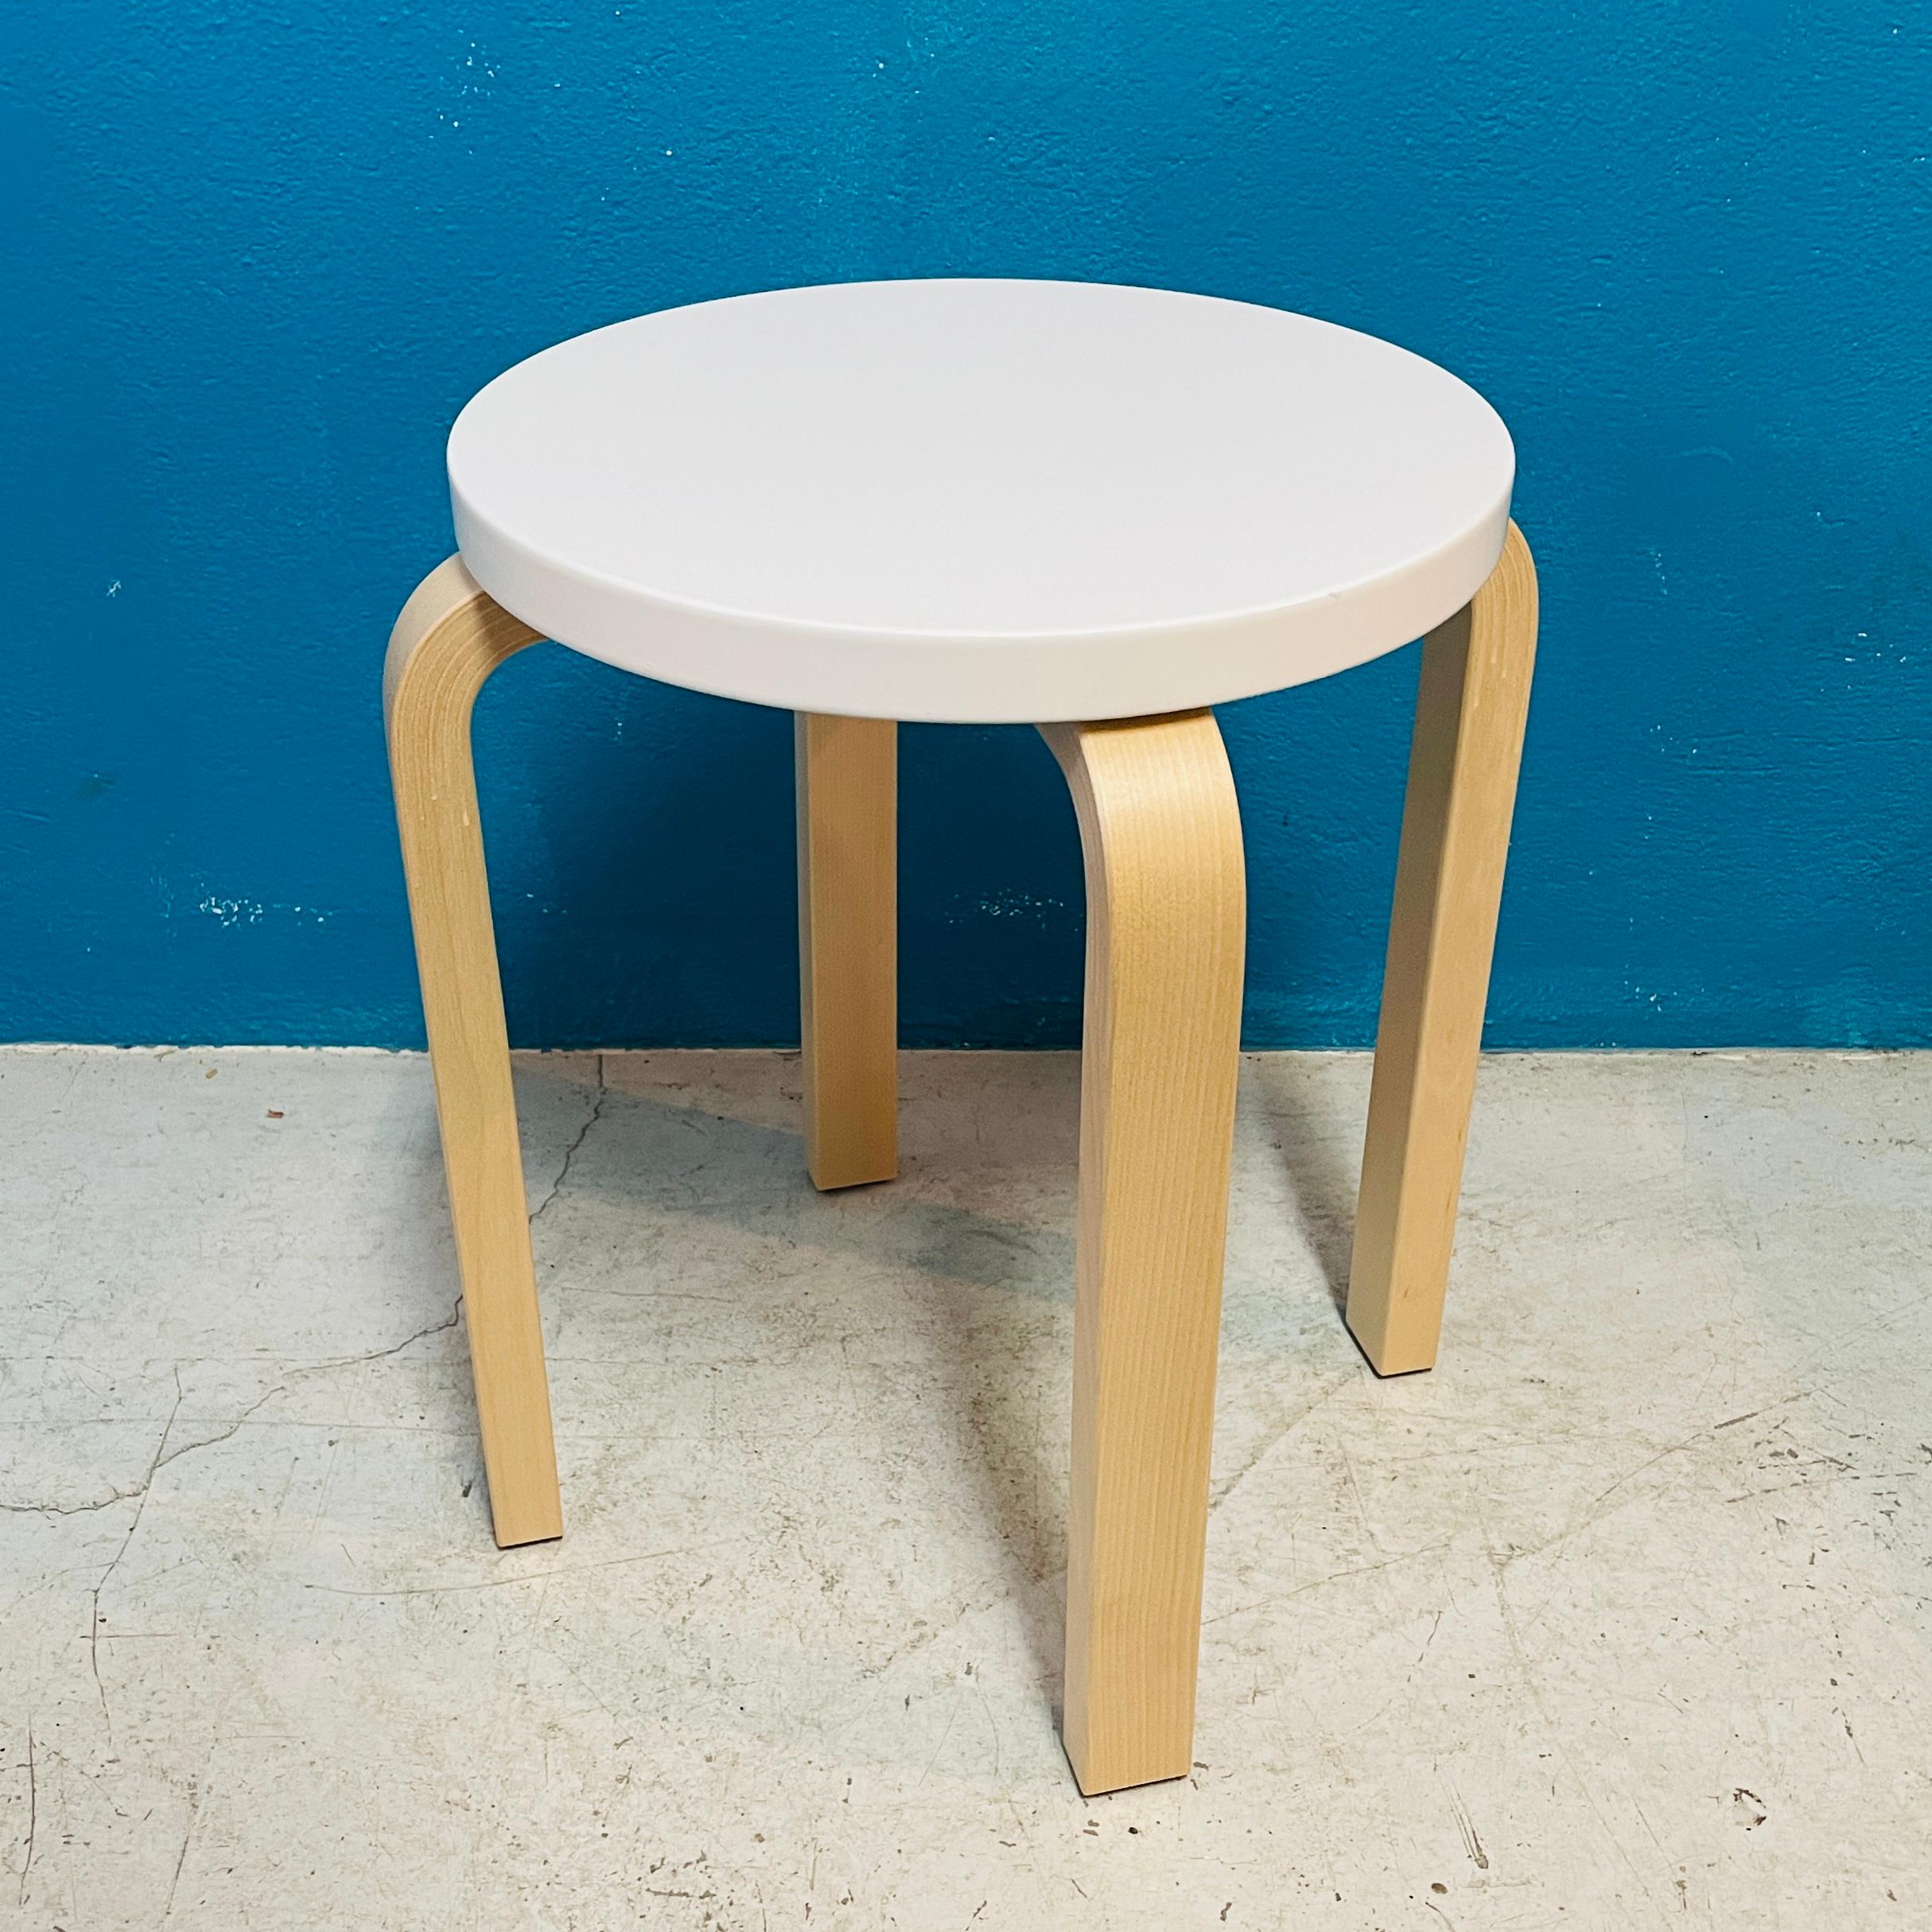 Stool E60, designed by Alvar Aalto for Artek, is one of the icons of Finnish furniture design. The four-legged Aalto stool is still today a beautiful, genius product whose simple shape will always be modern. Stool E60 makes a perfect extra chair and